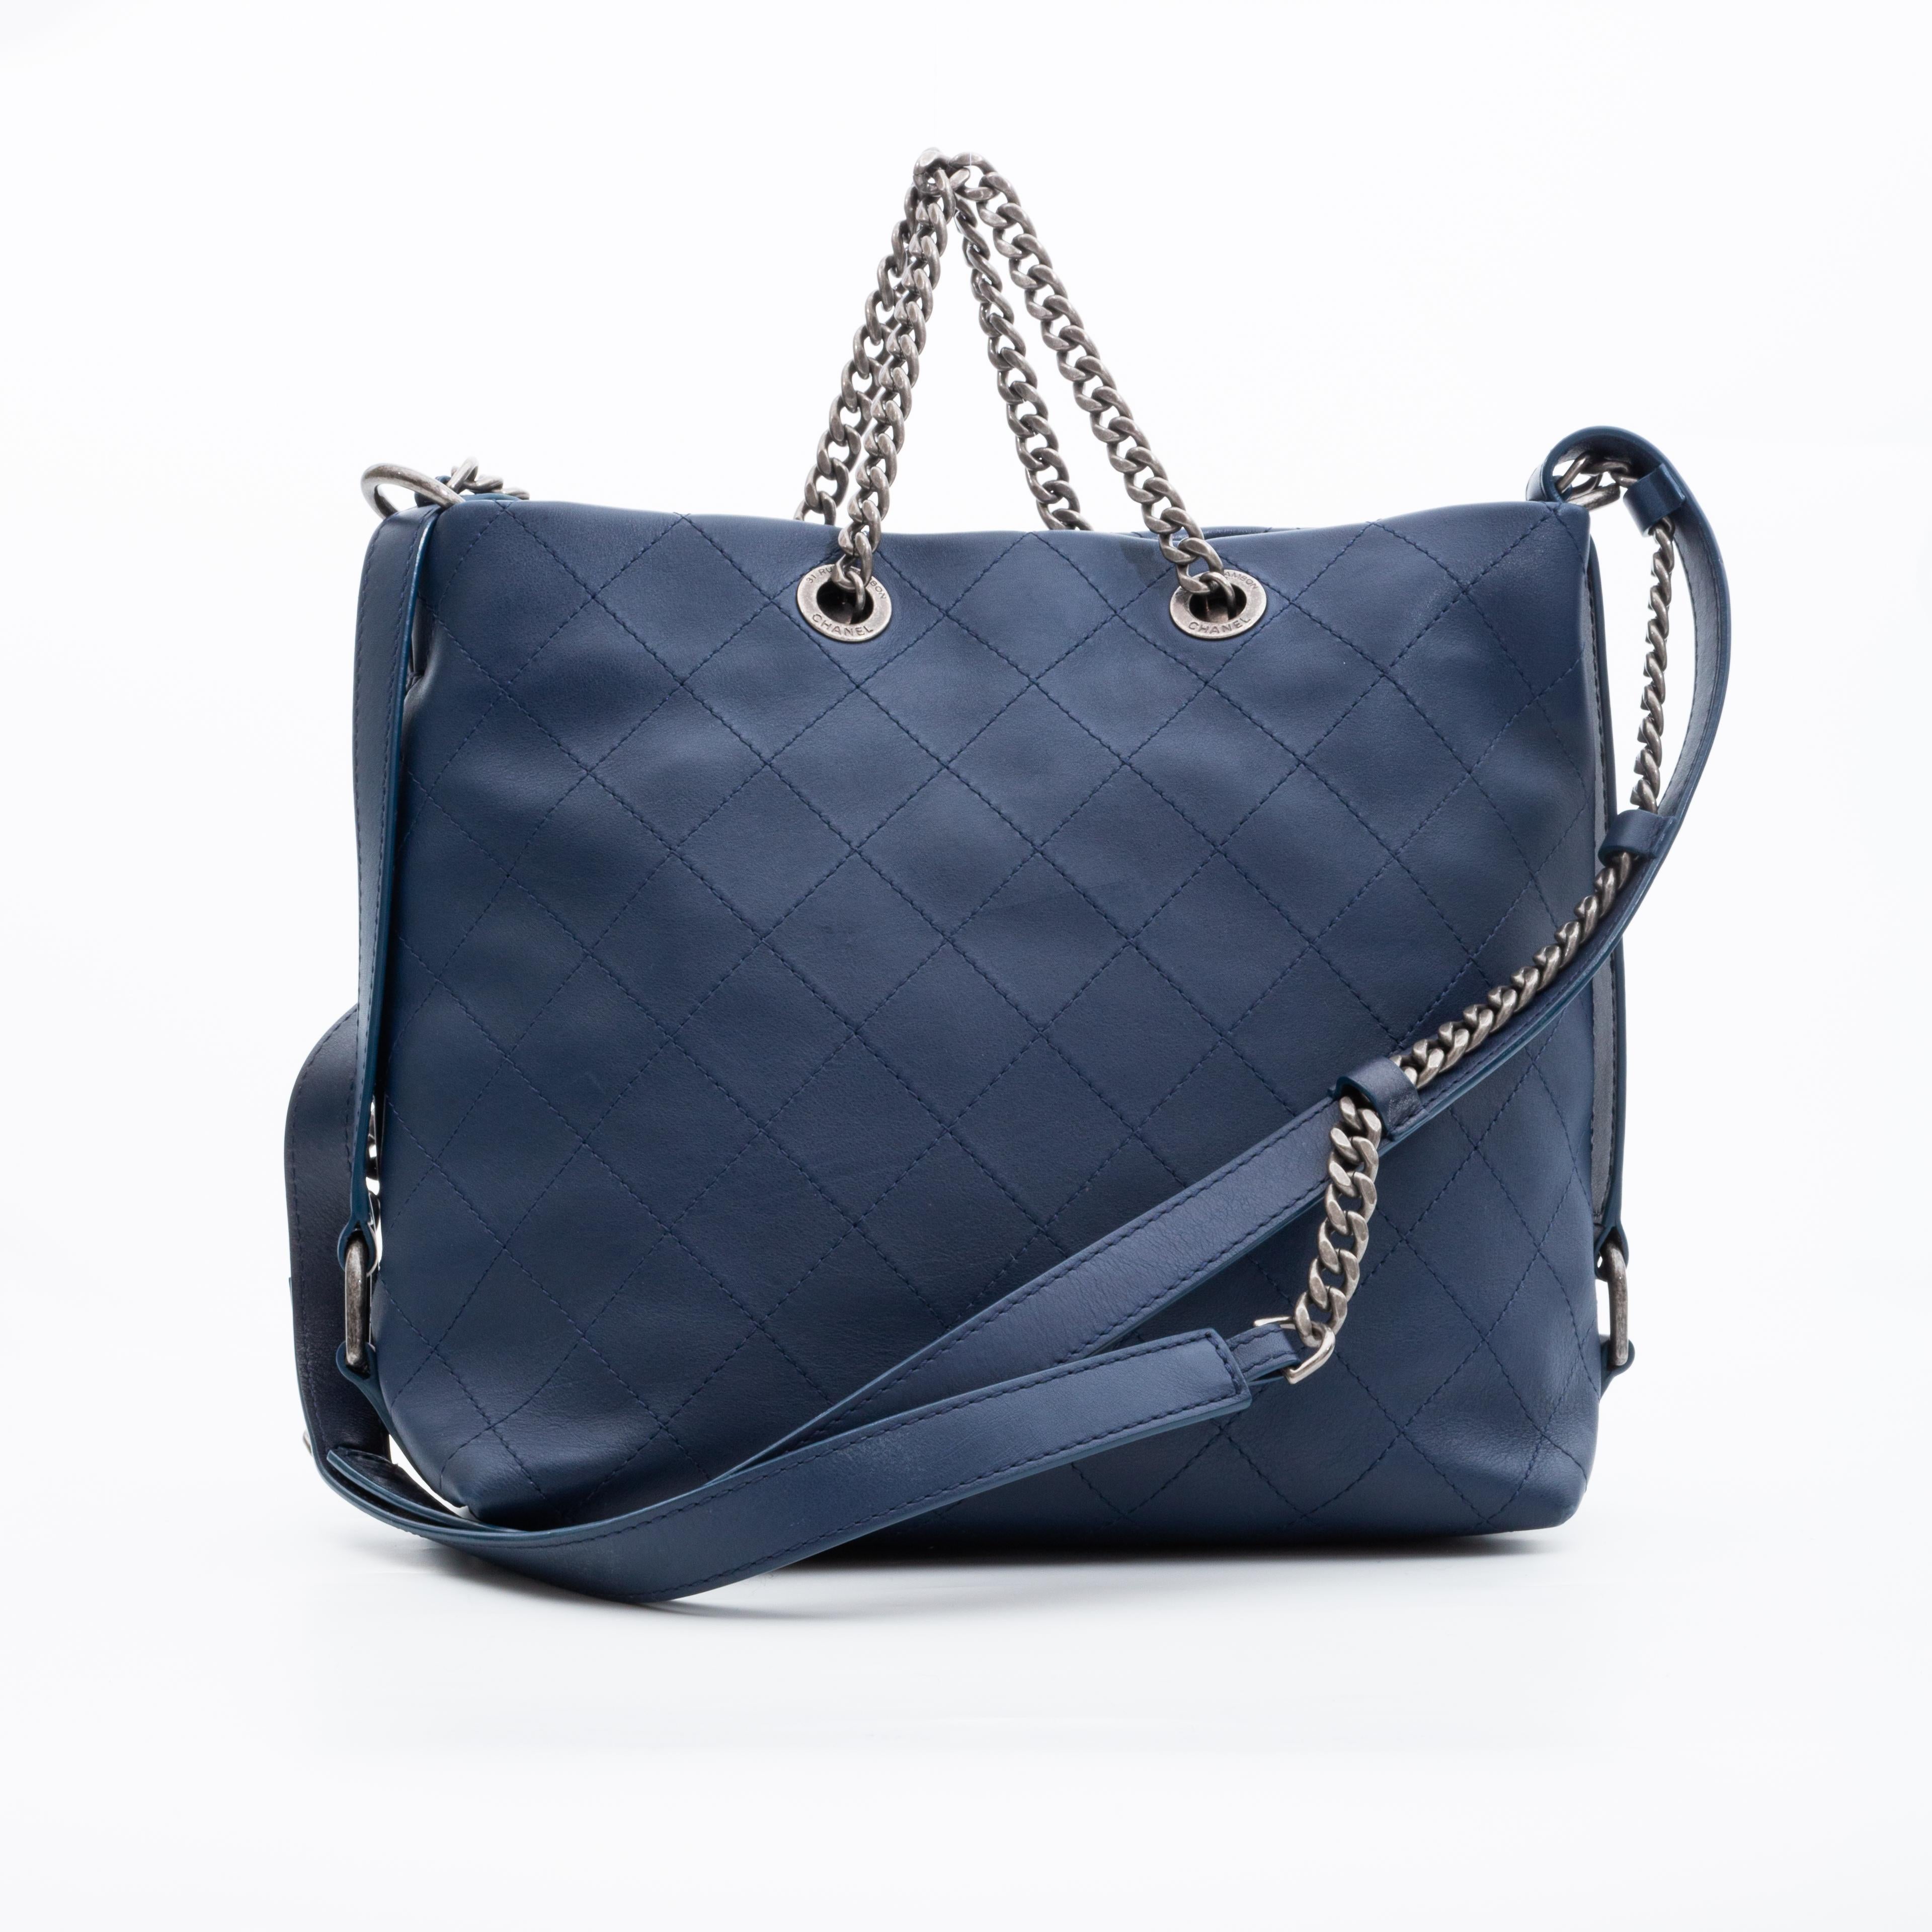 From the 2017 collection. This Chanel hobo bag is made with soft quilted calfskin leather in blue with a slouching shape. The bag features ruthenium (gunmetal) hardware, a long flat leather shoulder or cross-body strap, chain top handles, a dangling